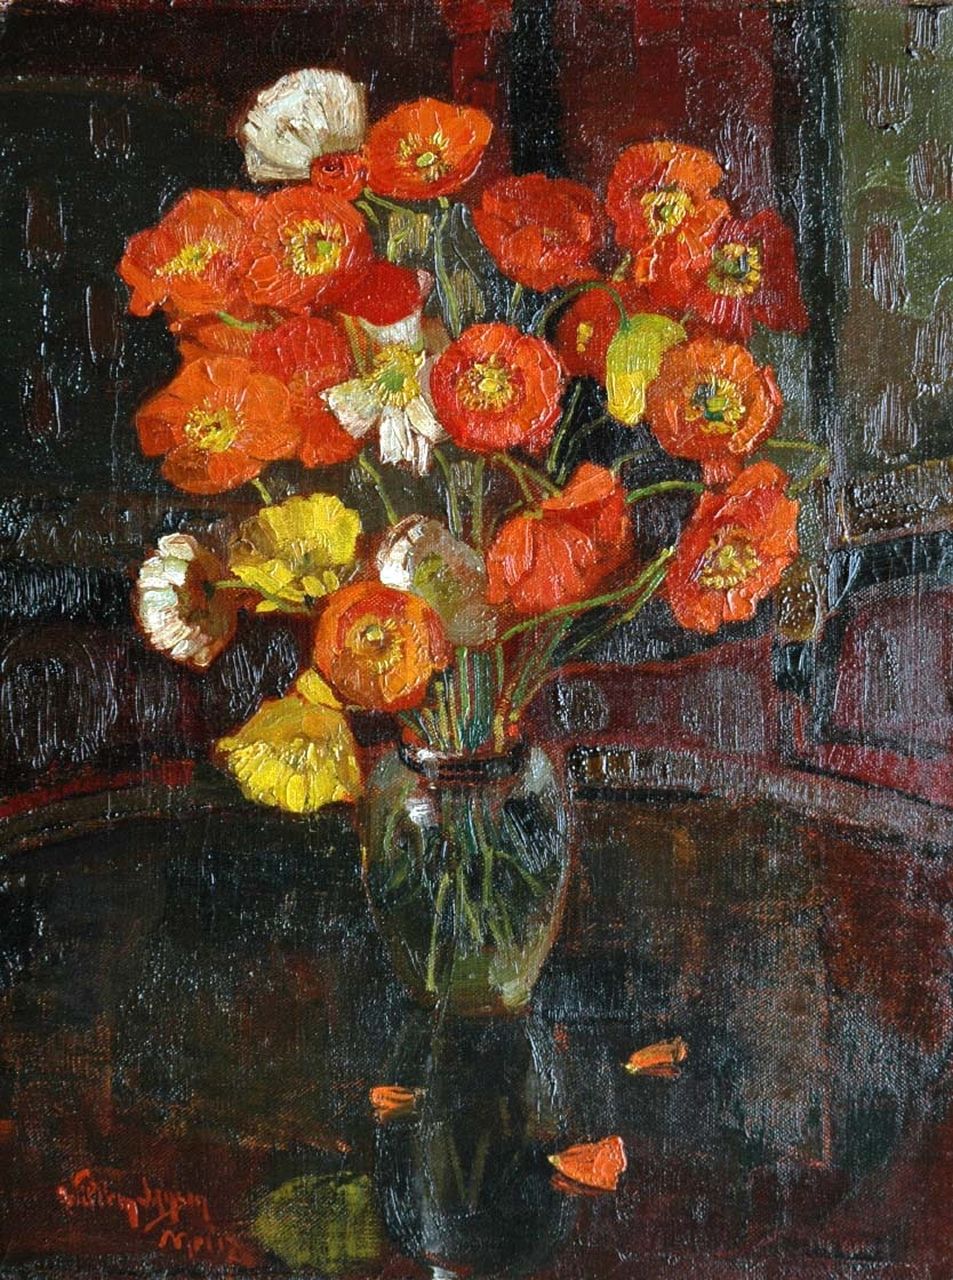 Willem Jansen | A still life with poppies, Öl auf Leinwand, 44,7 x 34,5 cm, signed l.l. und painted in May '17